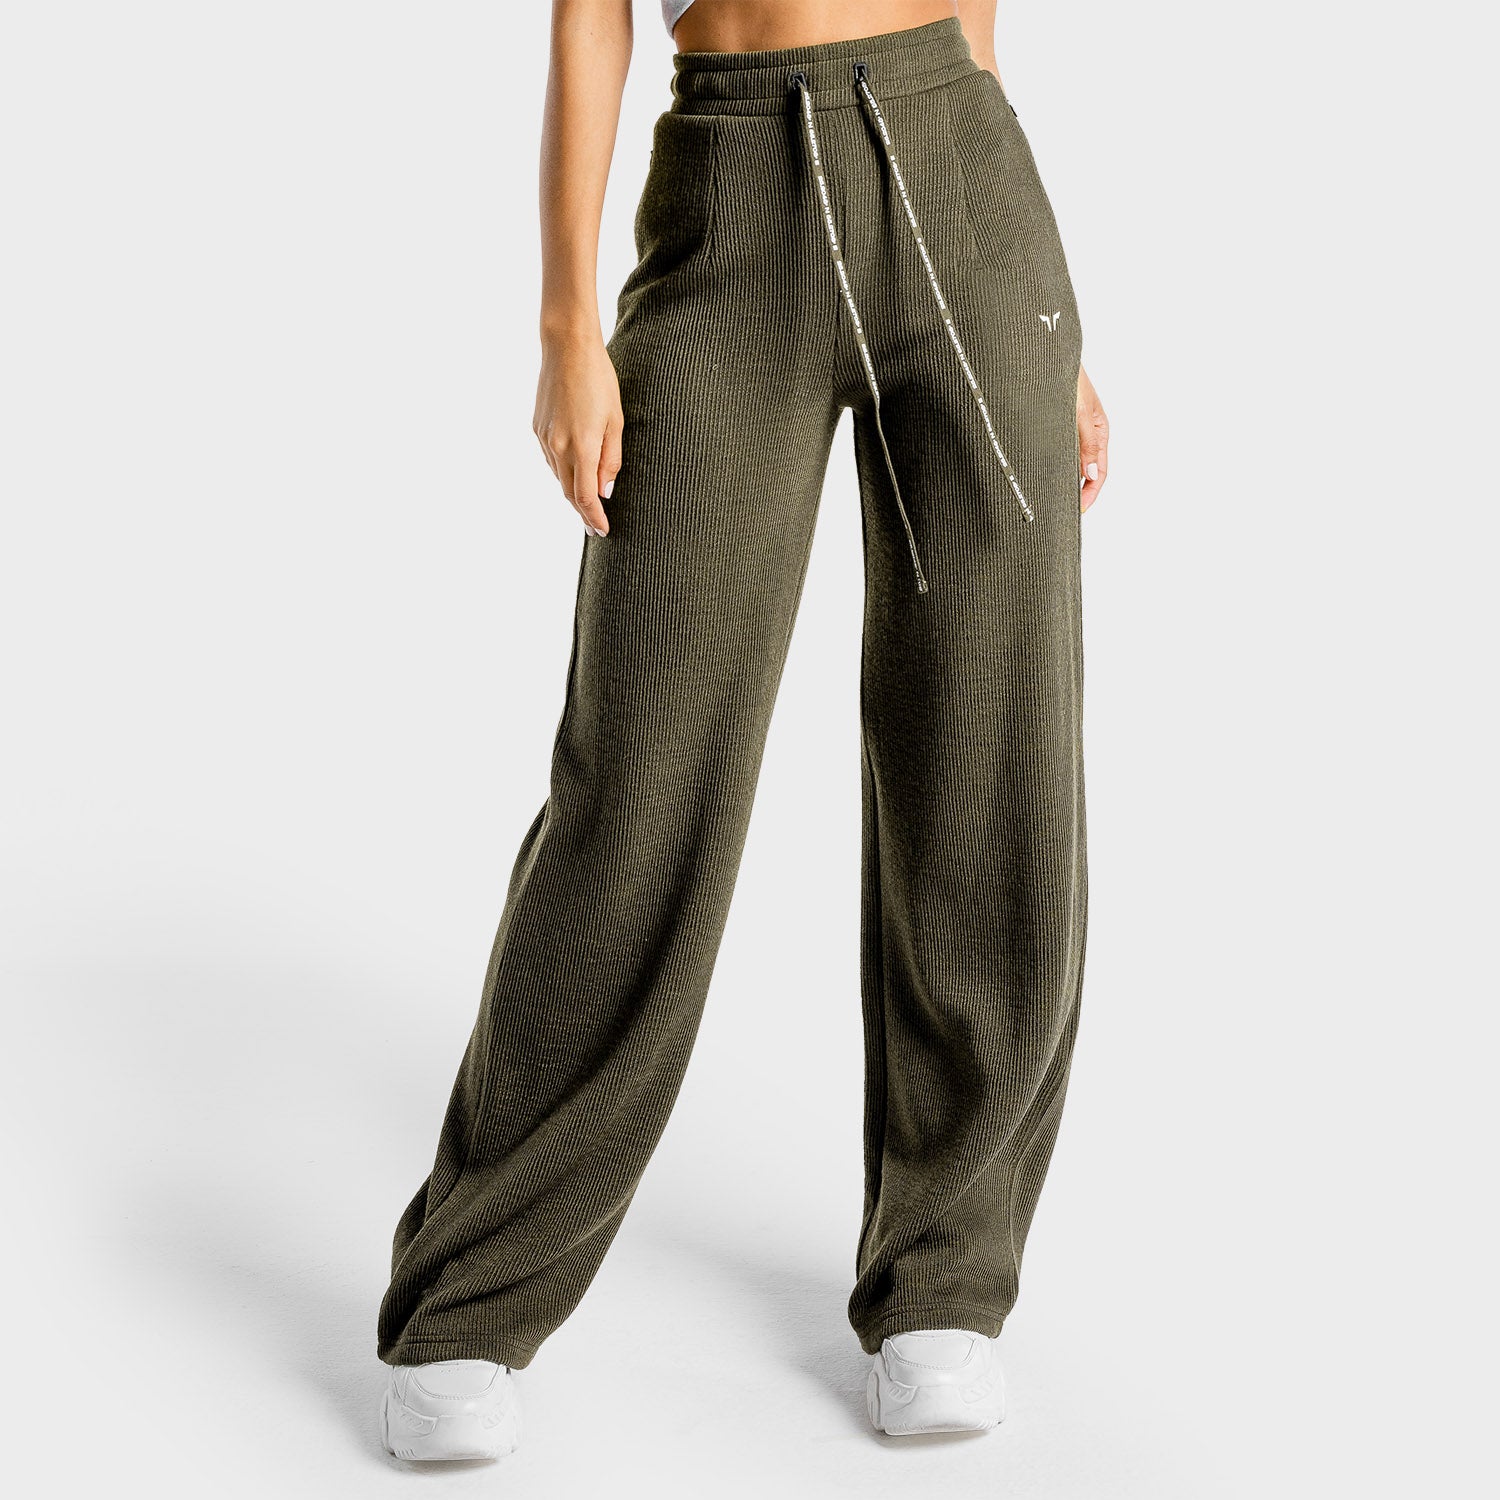 squatwolf-gym-pants-for-women-luxe-wide-leg-pants-olive-workout-clothes